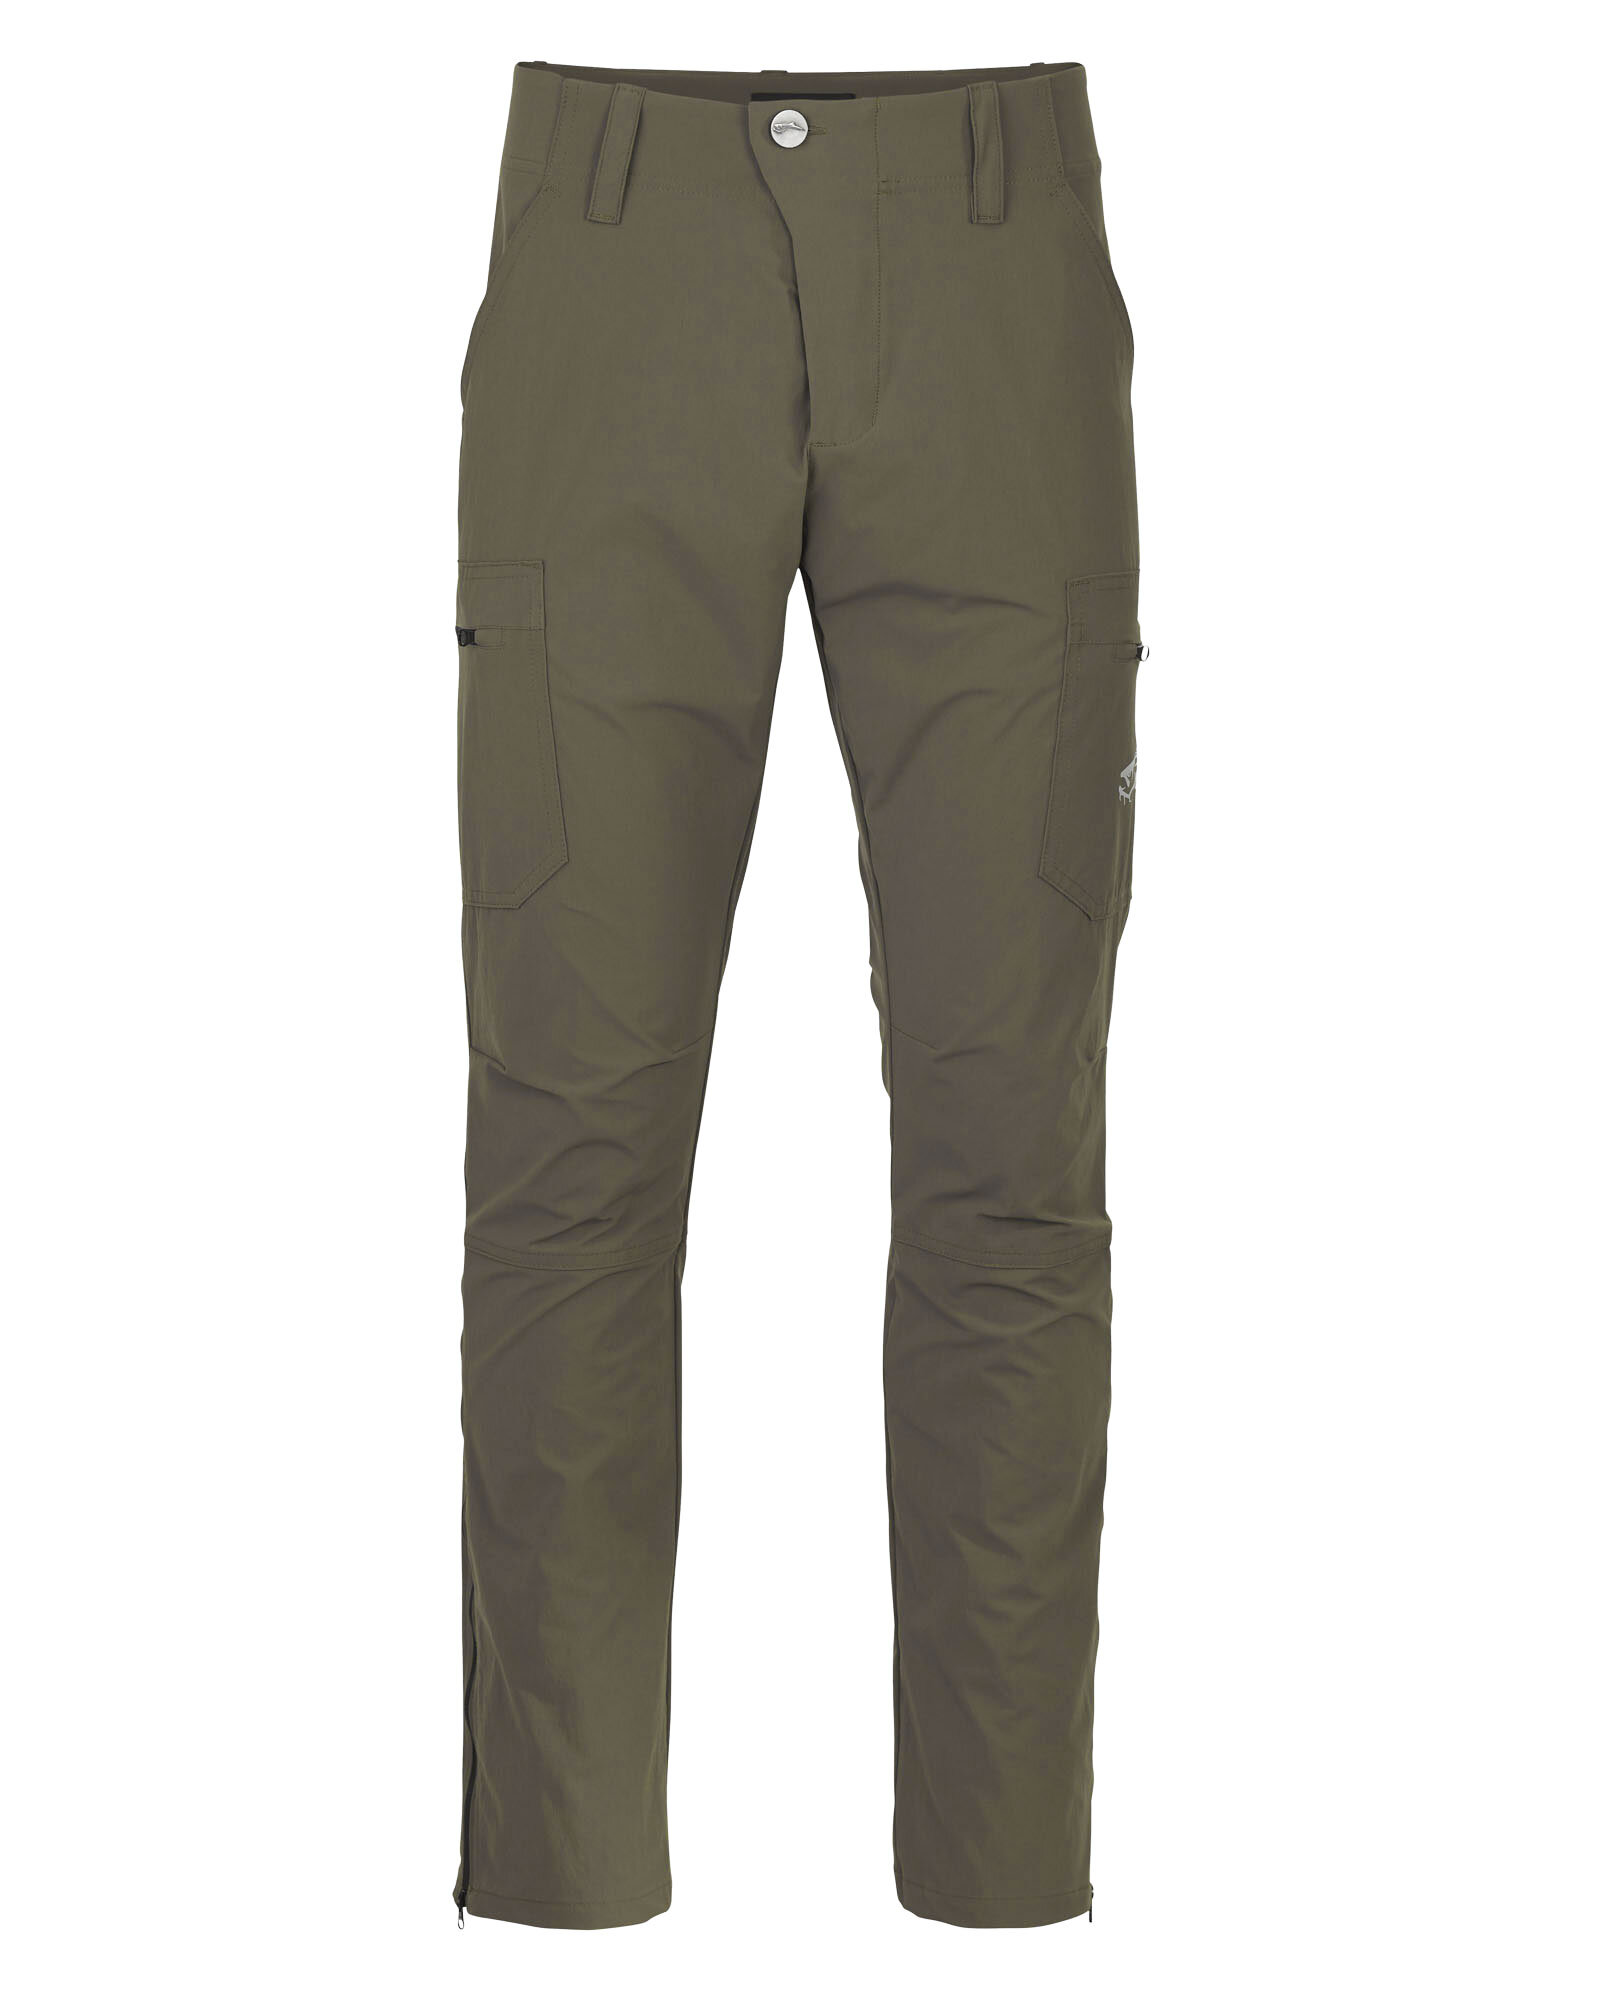 Pursuit Pants | Olive - Bow and Rod